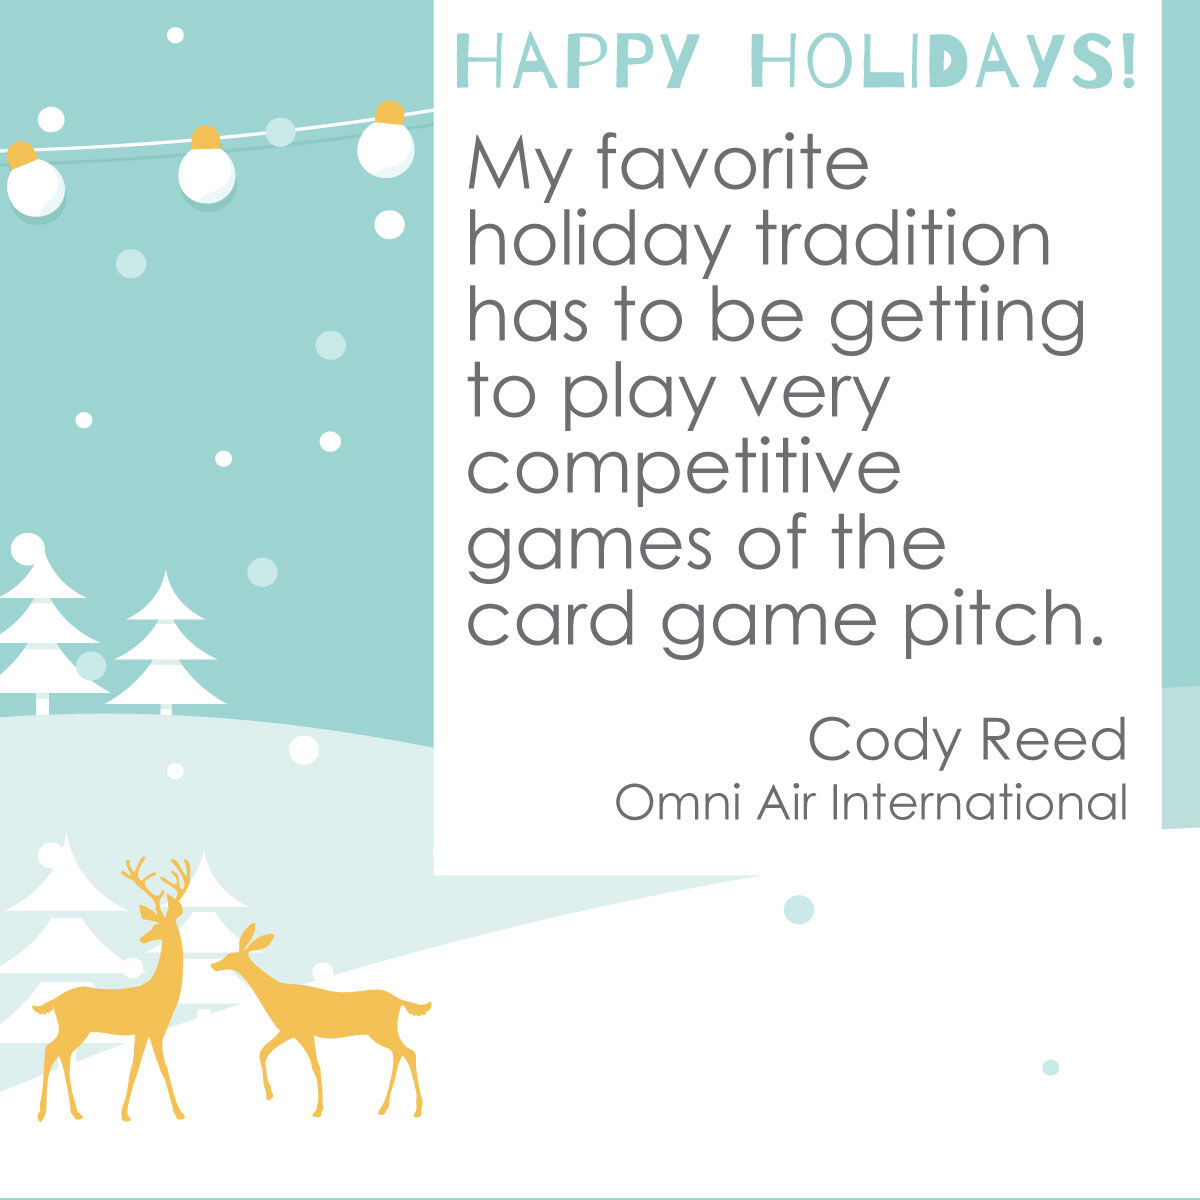 We asked our employees to share their favorite holiday memories and traditions. Does your family have any games you play each year? #holidays #memories